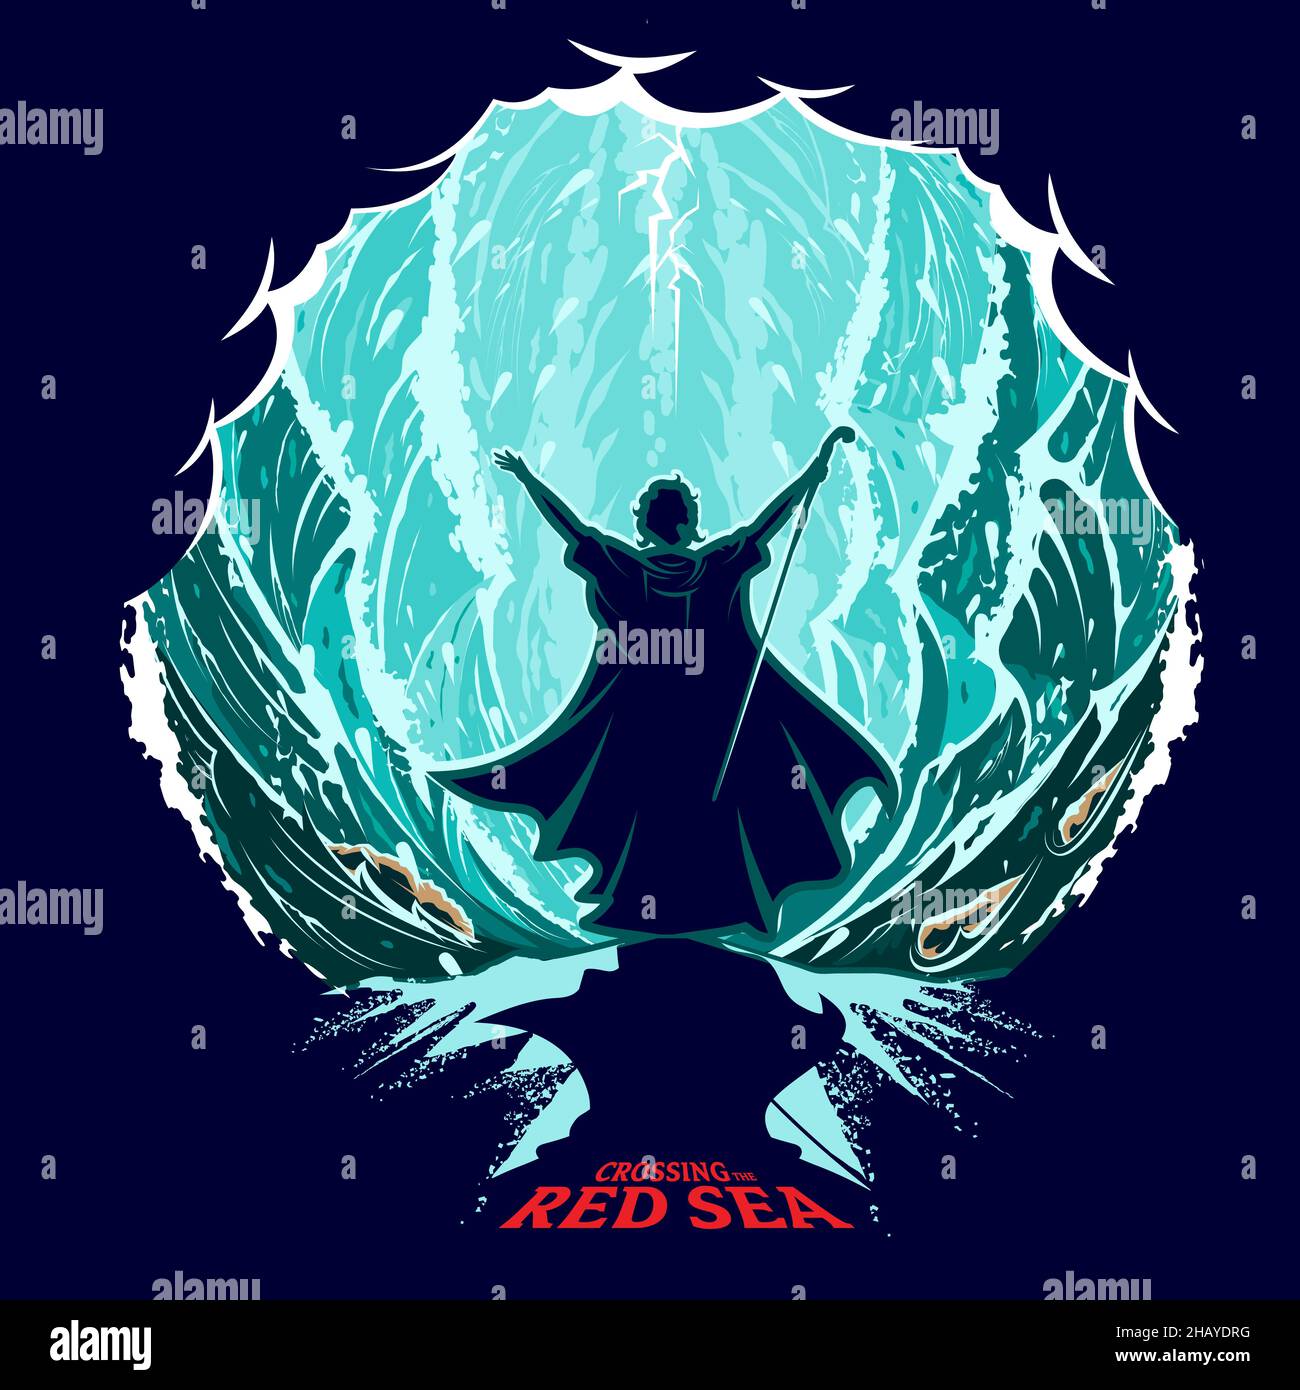 Moses Parting and Crossing the Red Sea Vektordarstellung für Poster, T-Shirt-Grafik, Logo oder andere Zwecke Stock Vektor